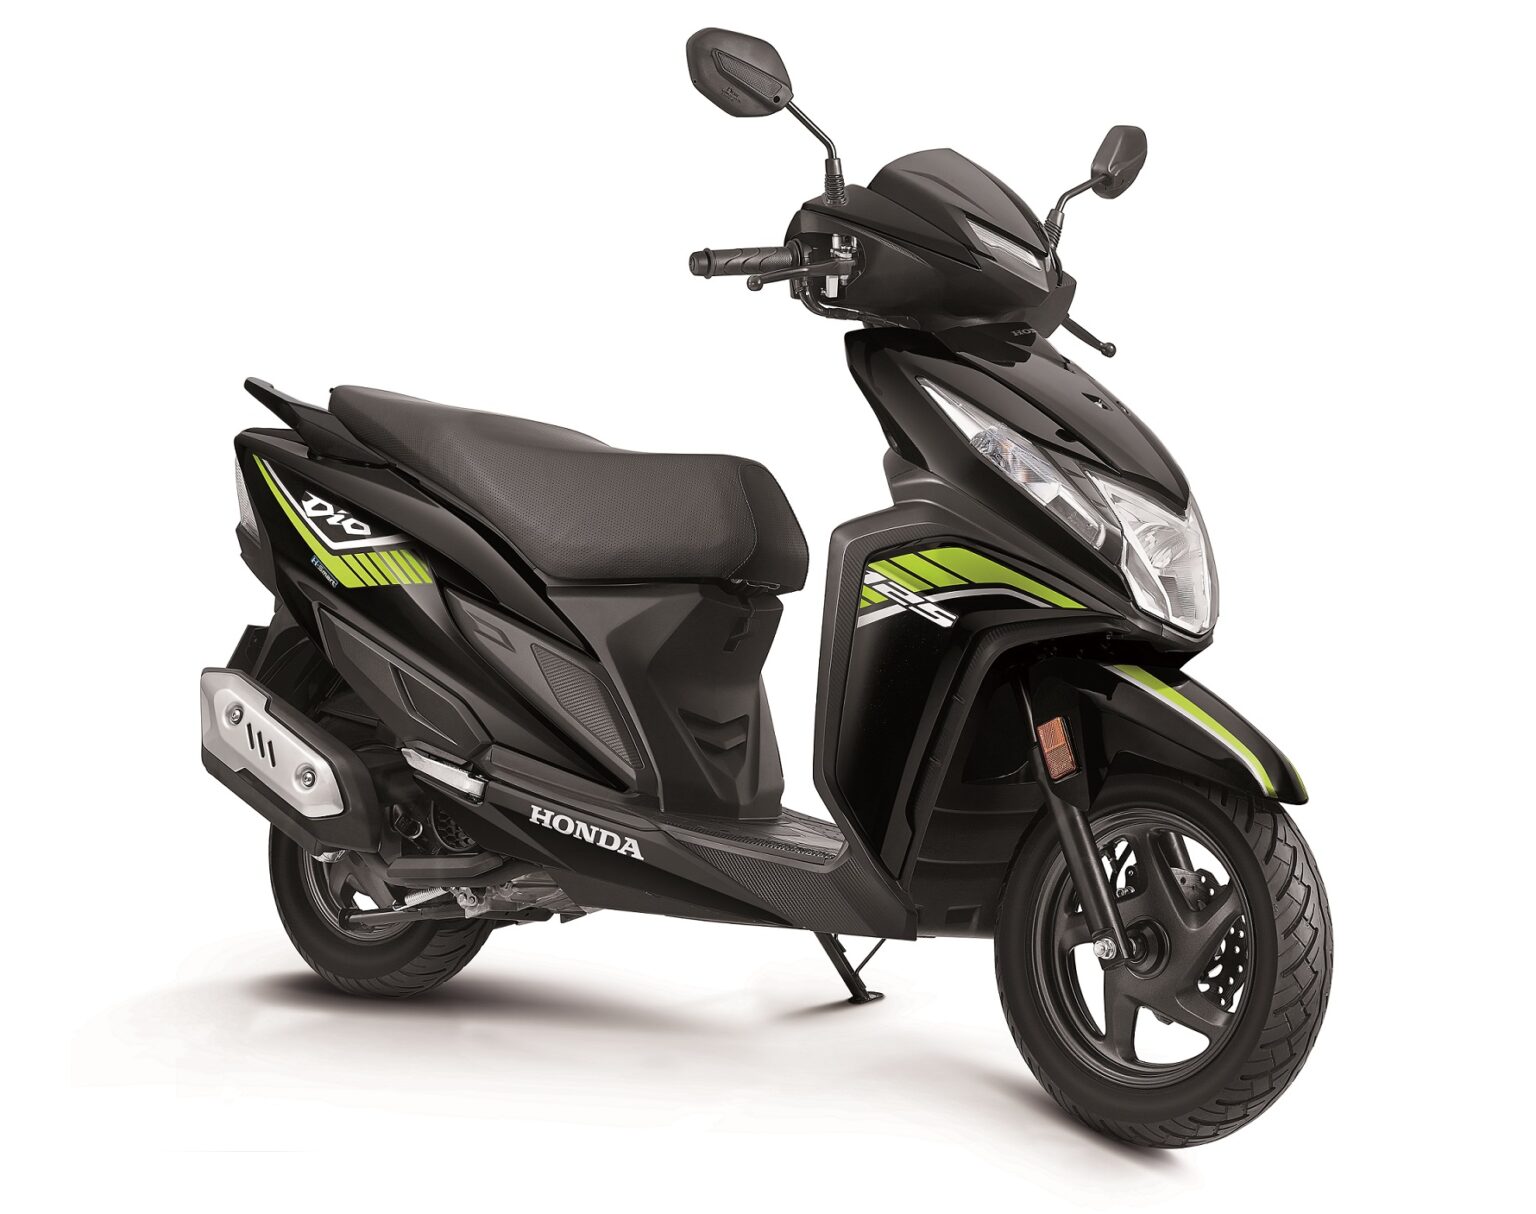 honda dio 125 on-road price and specs all details